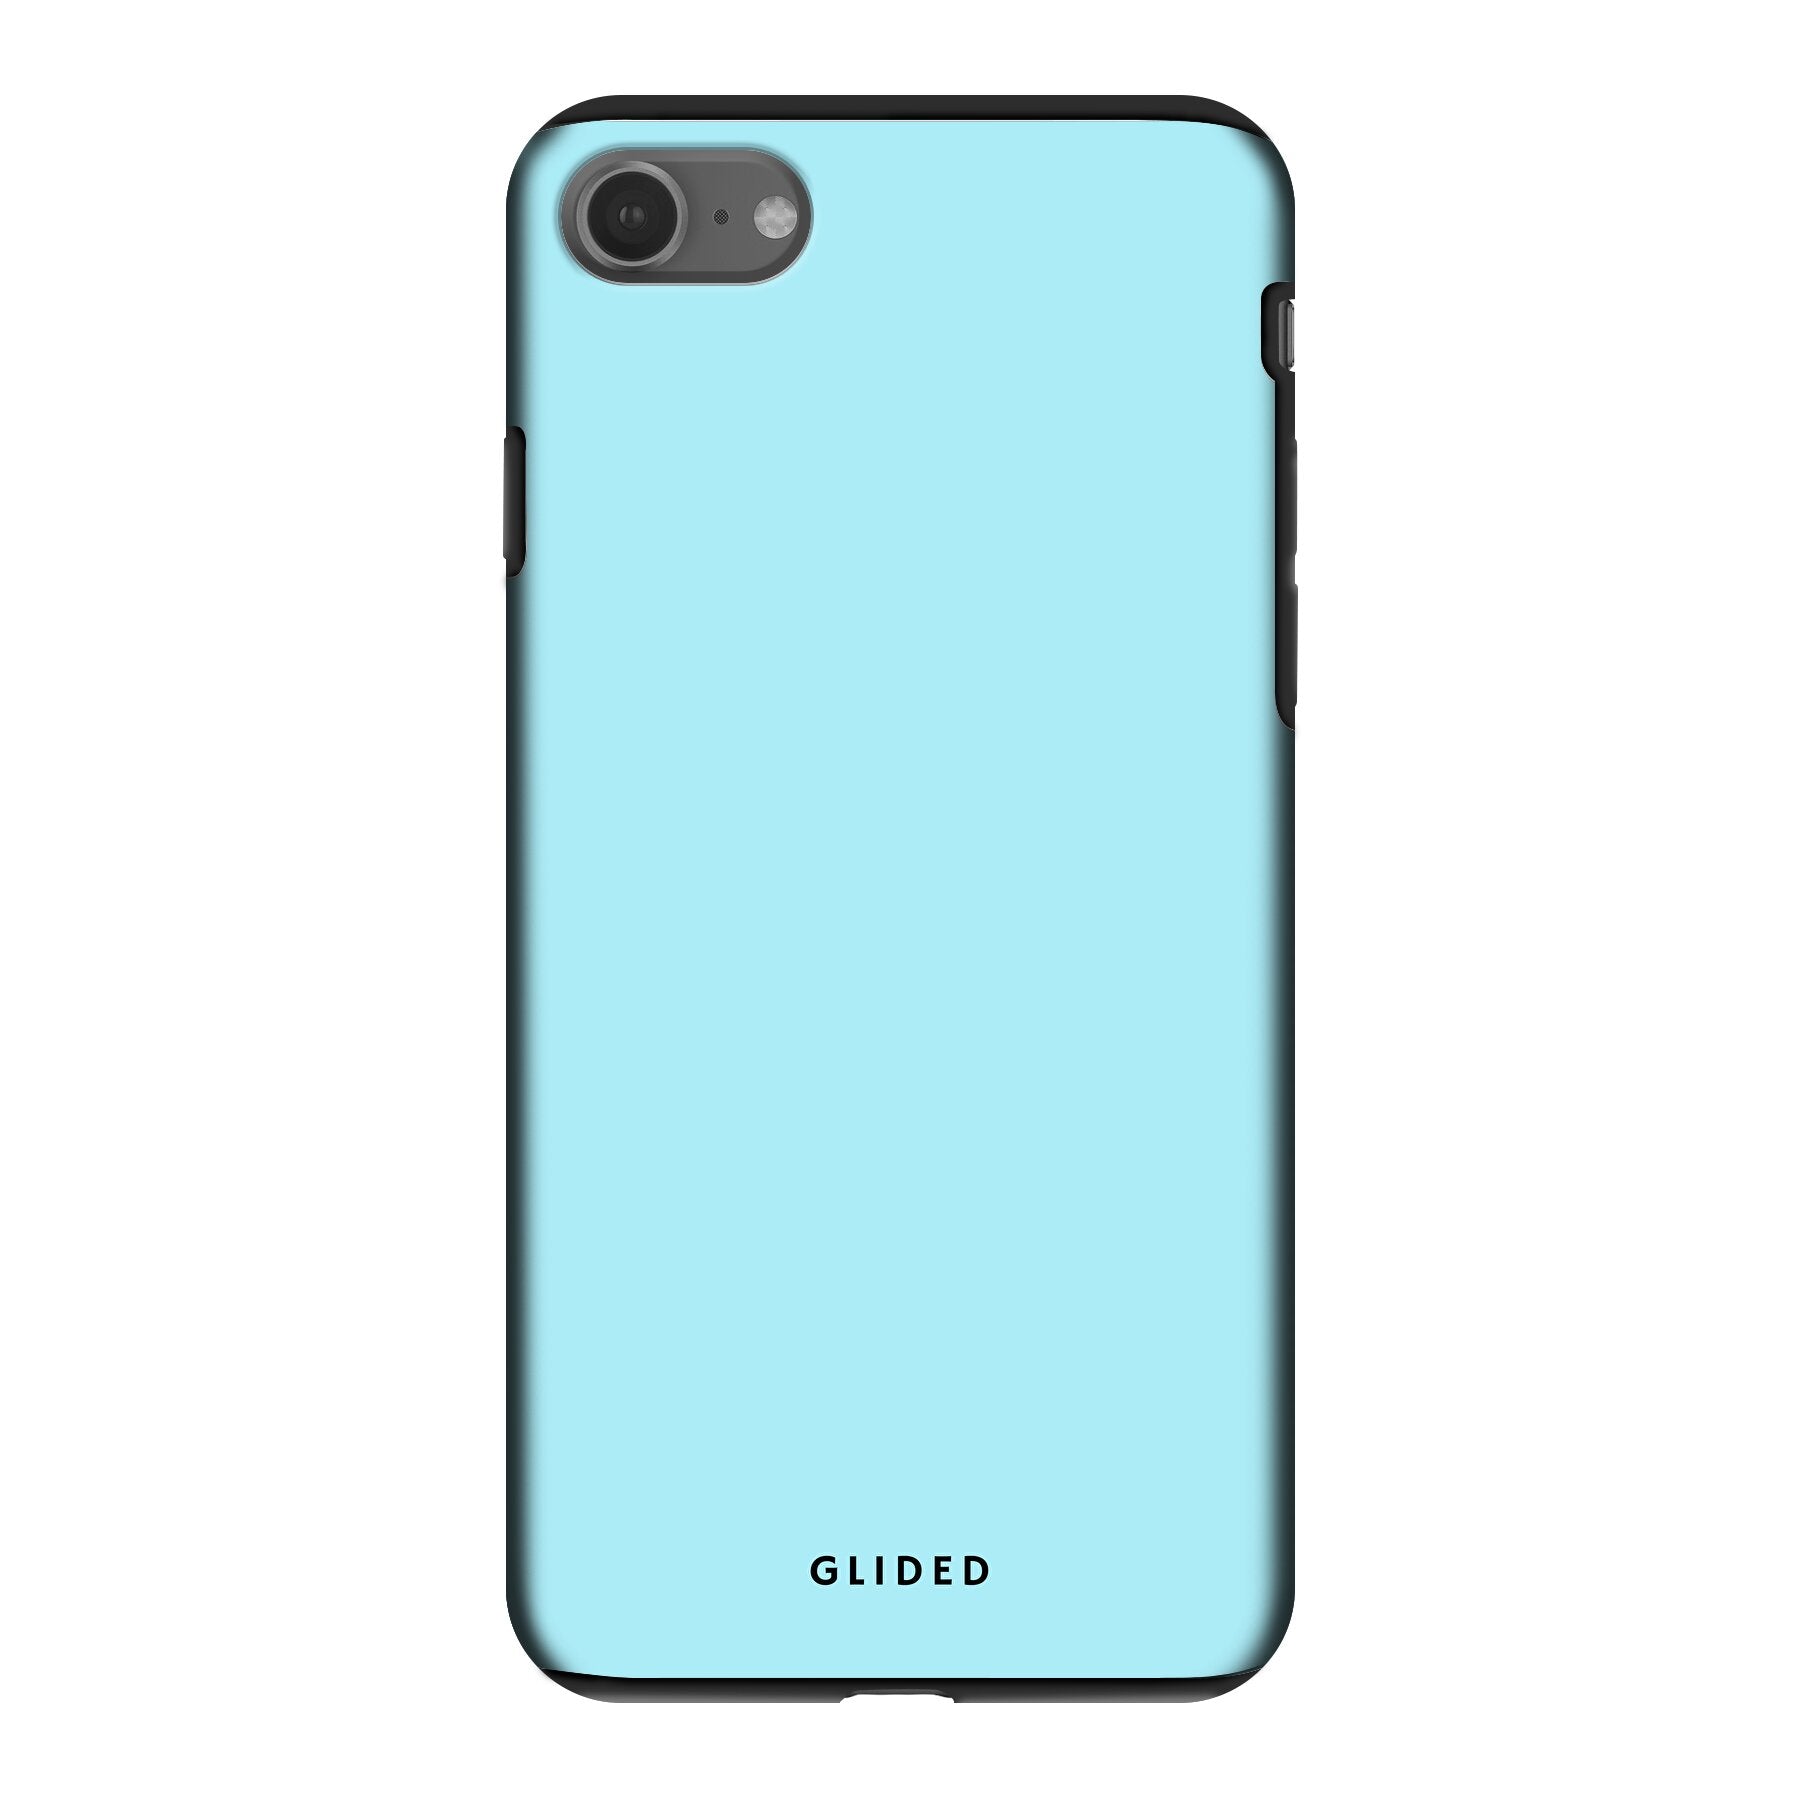 Turquoise Touch - iPhone 7 Handyhülle Tough case